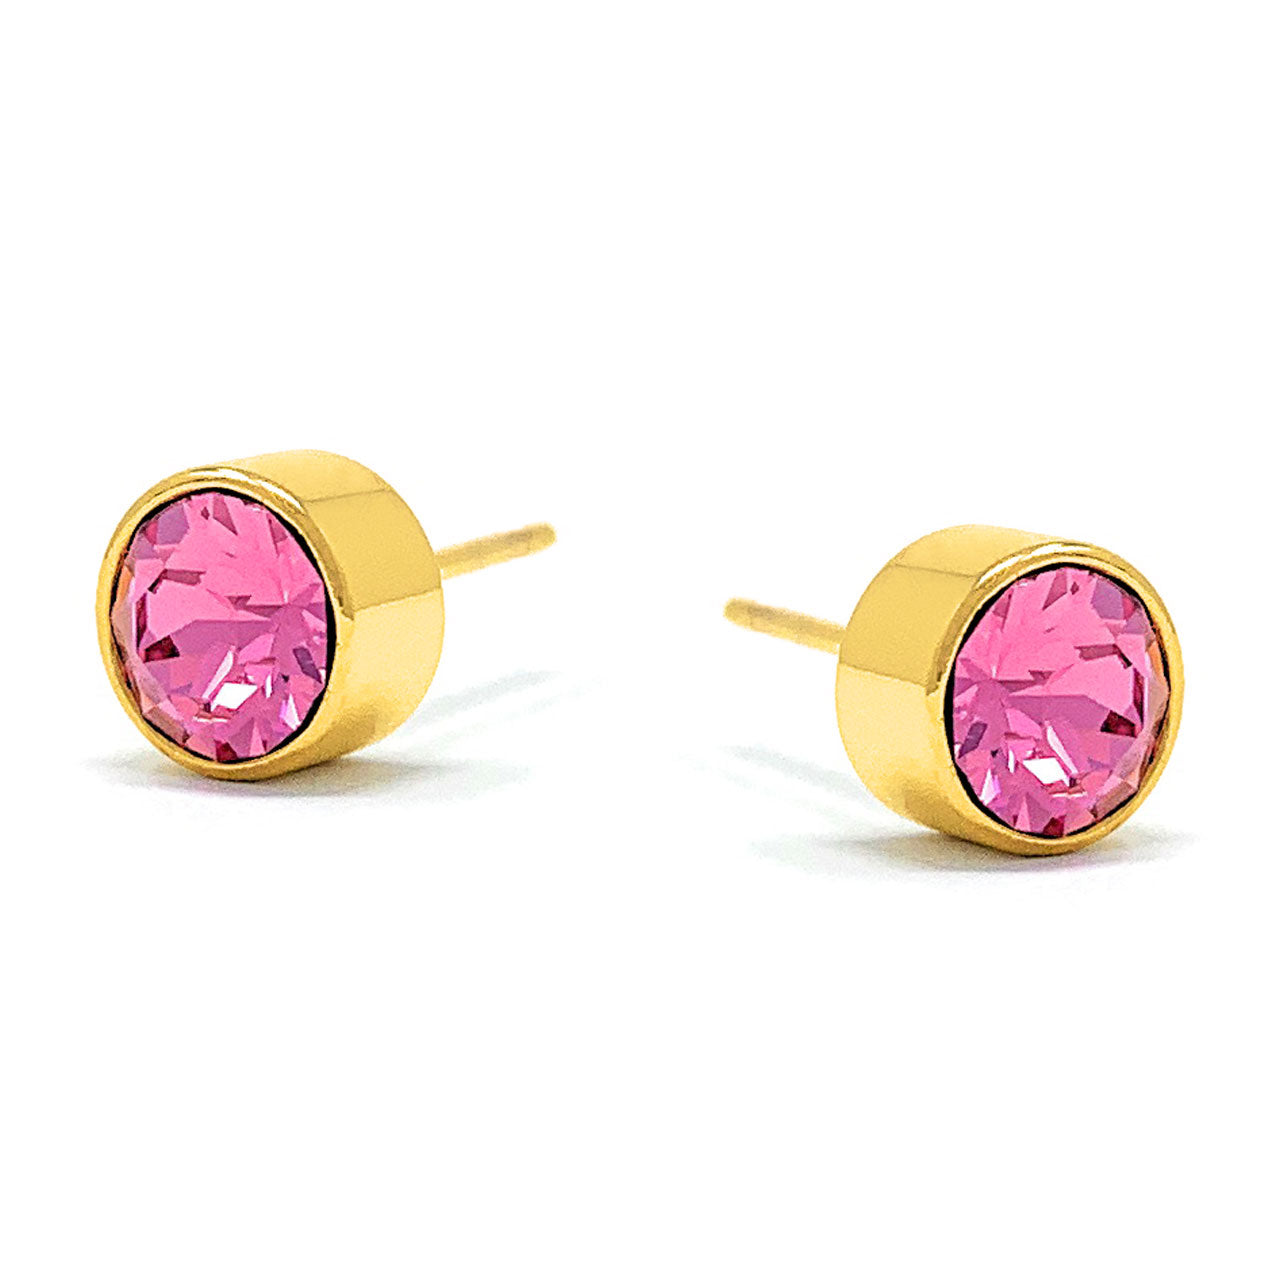 Harley Small Stud Earrings with Pink Rose Round Crystals from Swarovski Gold Plated - Ed Heart